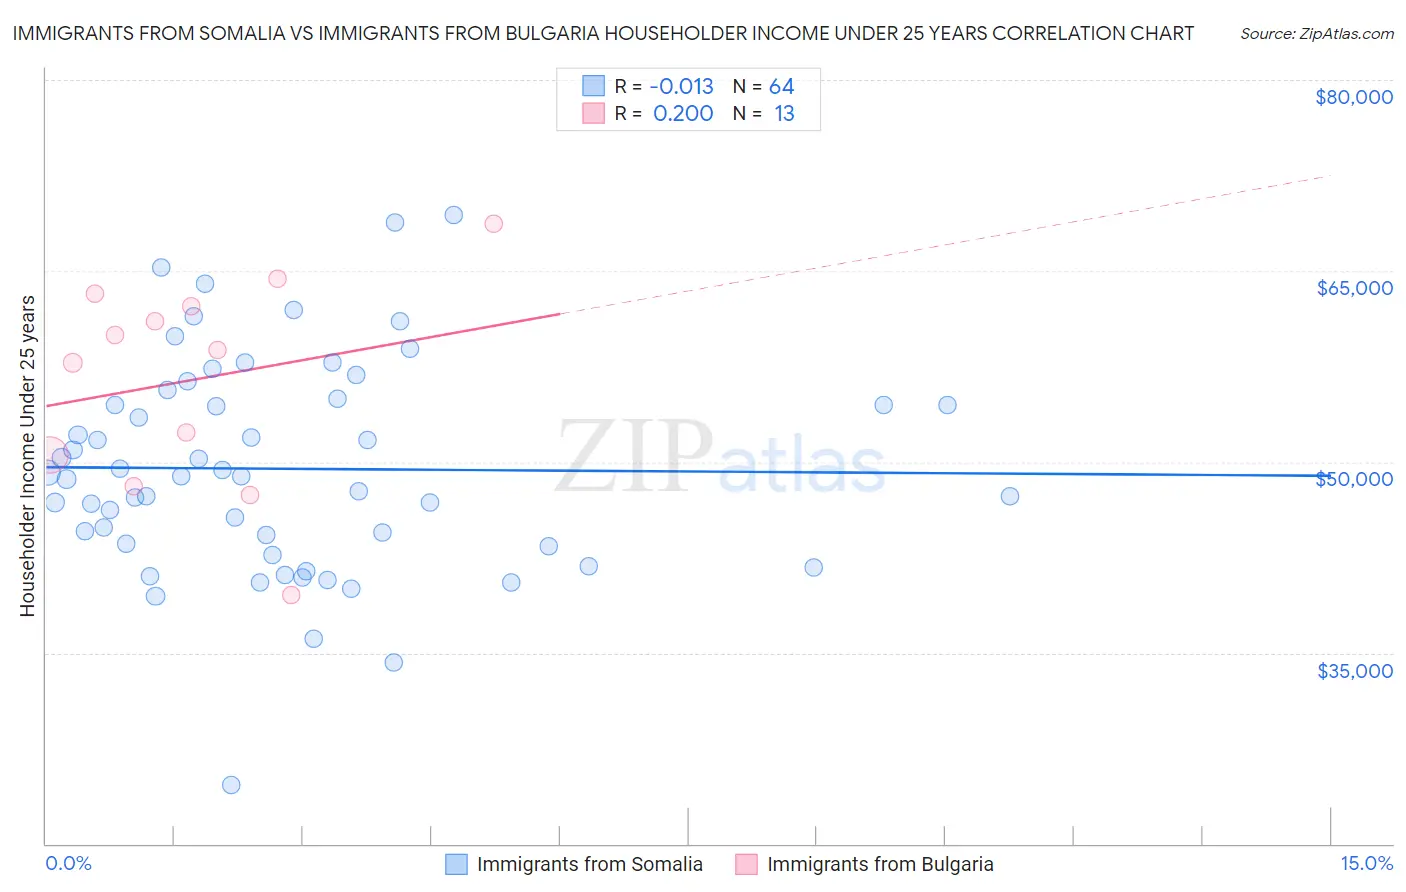 Immigrants from Somalia vs Immigrants from Bulgaria Householder Income Under 25 years